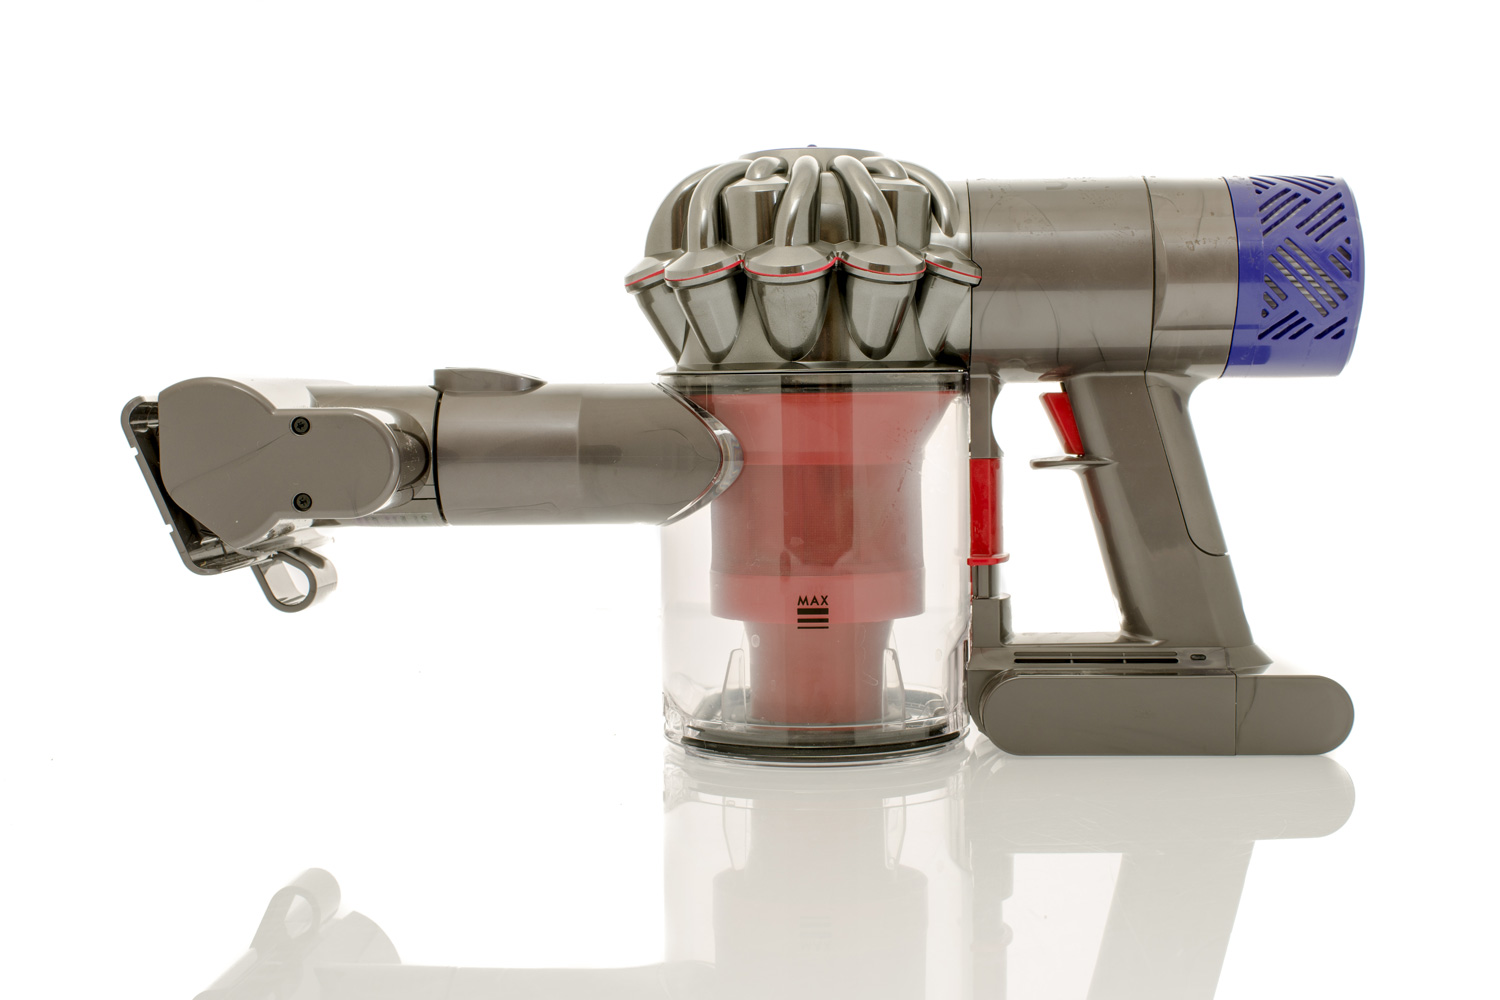 Dyson v6 absolute cordless vacuum cleaner on an isolated background.